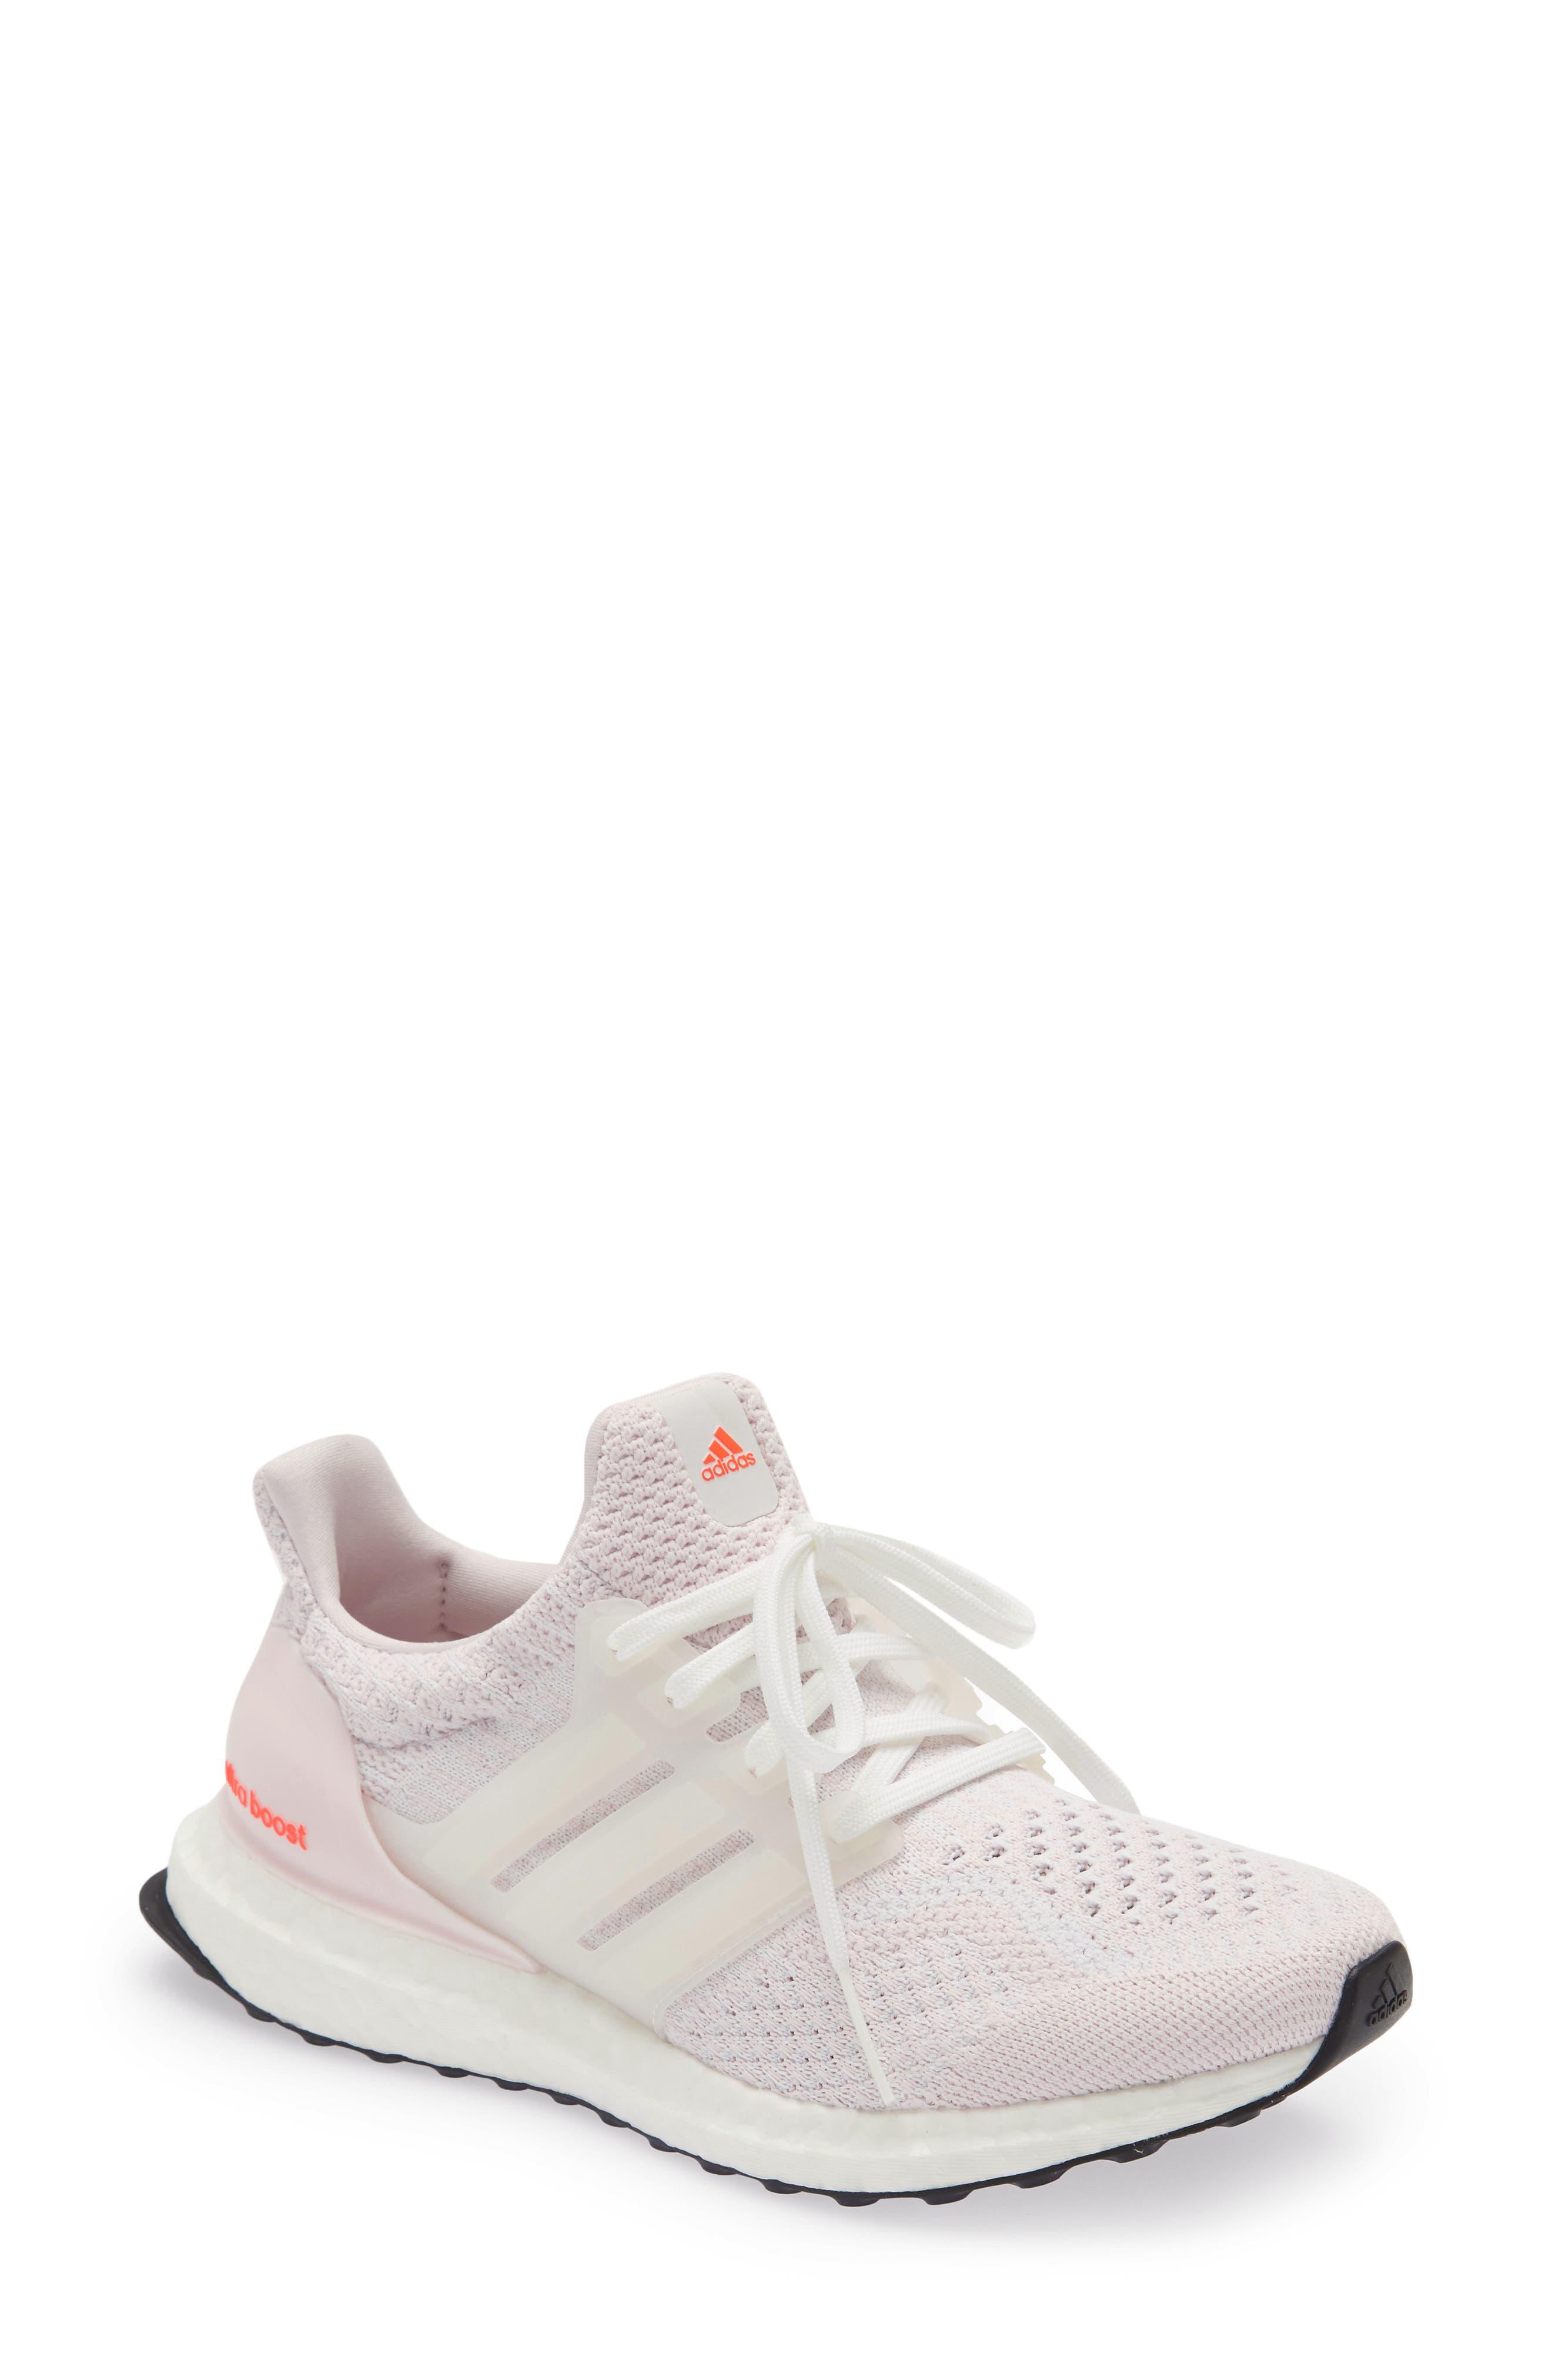 adidas Ultraboost 5.0 Dna Primeblue Sneaker In Almost Pink/white/turbo At  Nordstrom Rack | Lyst